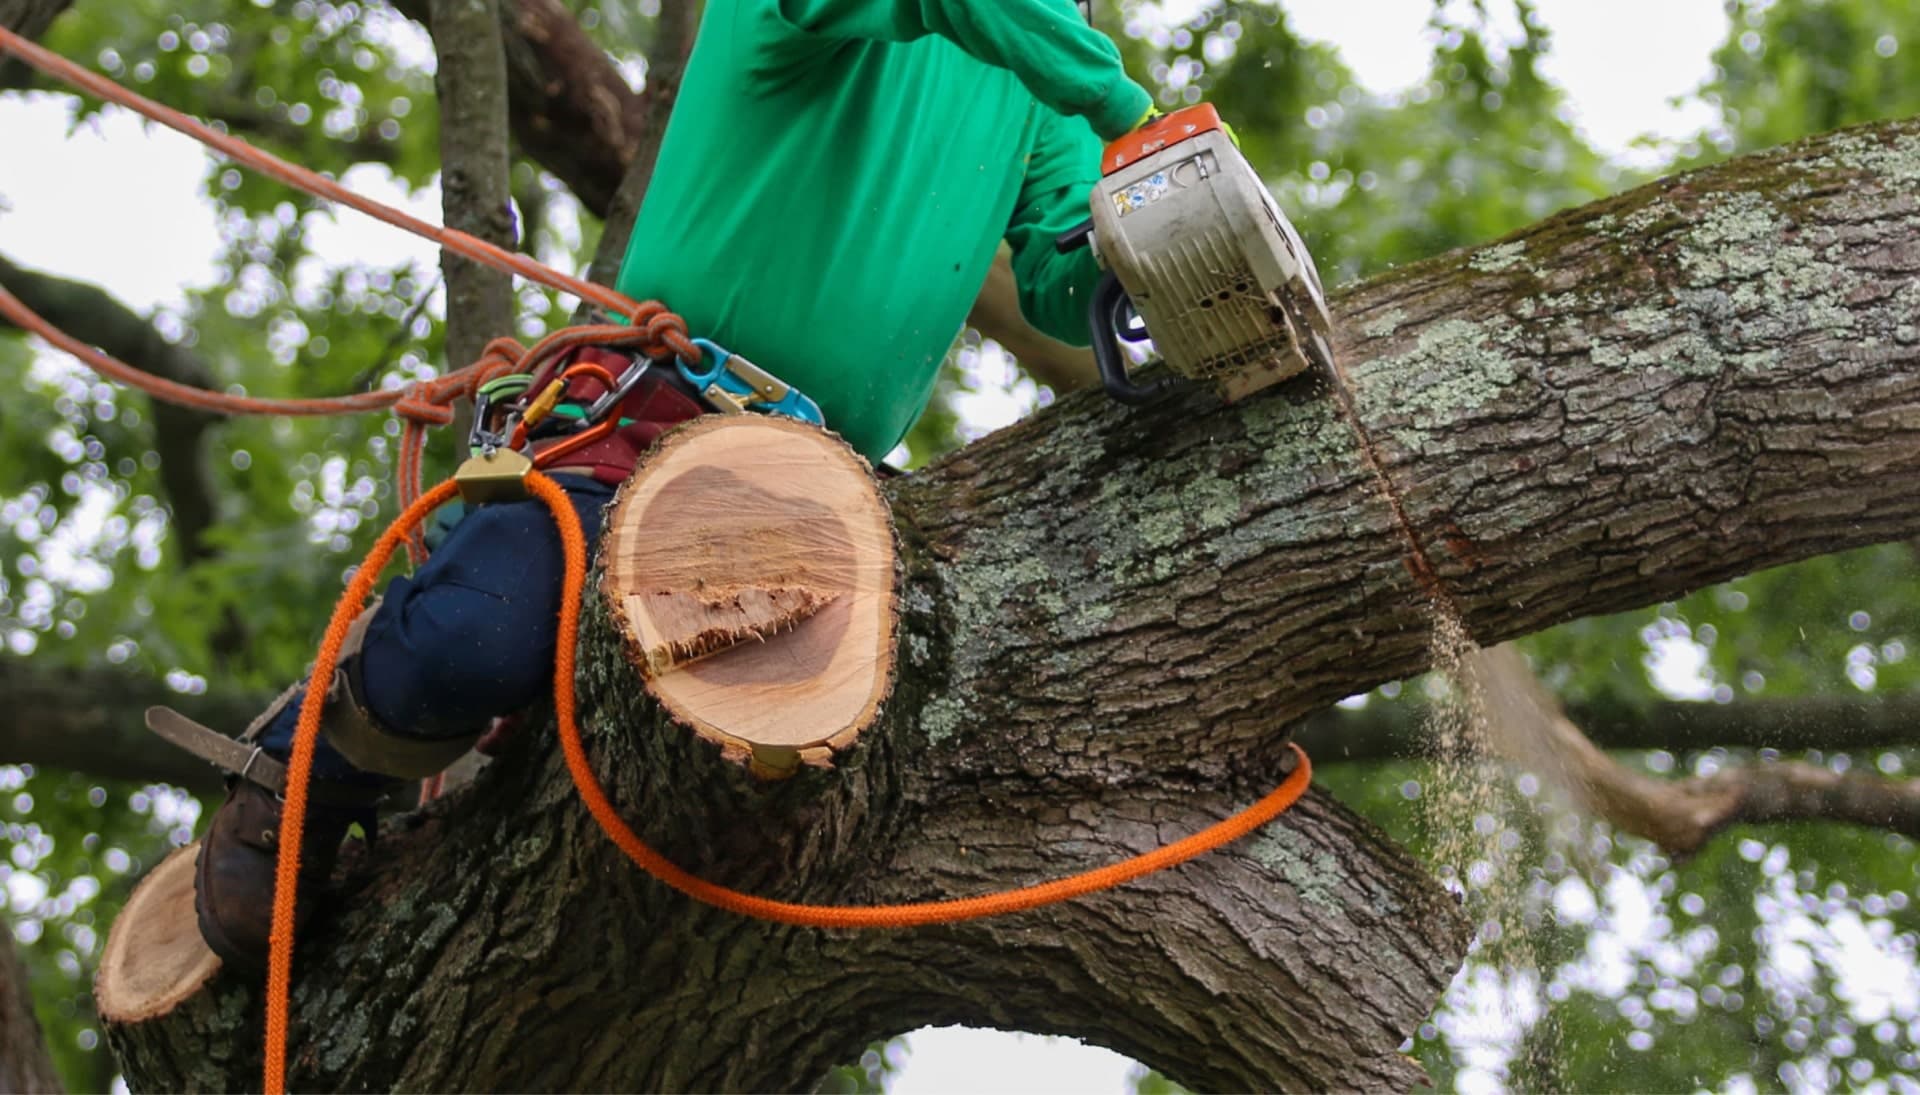 Shed your worries away with best tree removal in Nampa